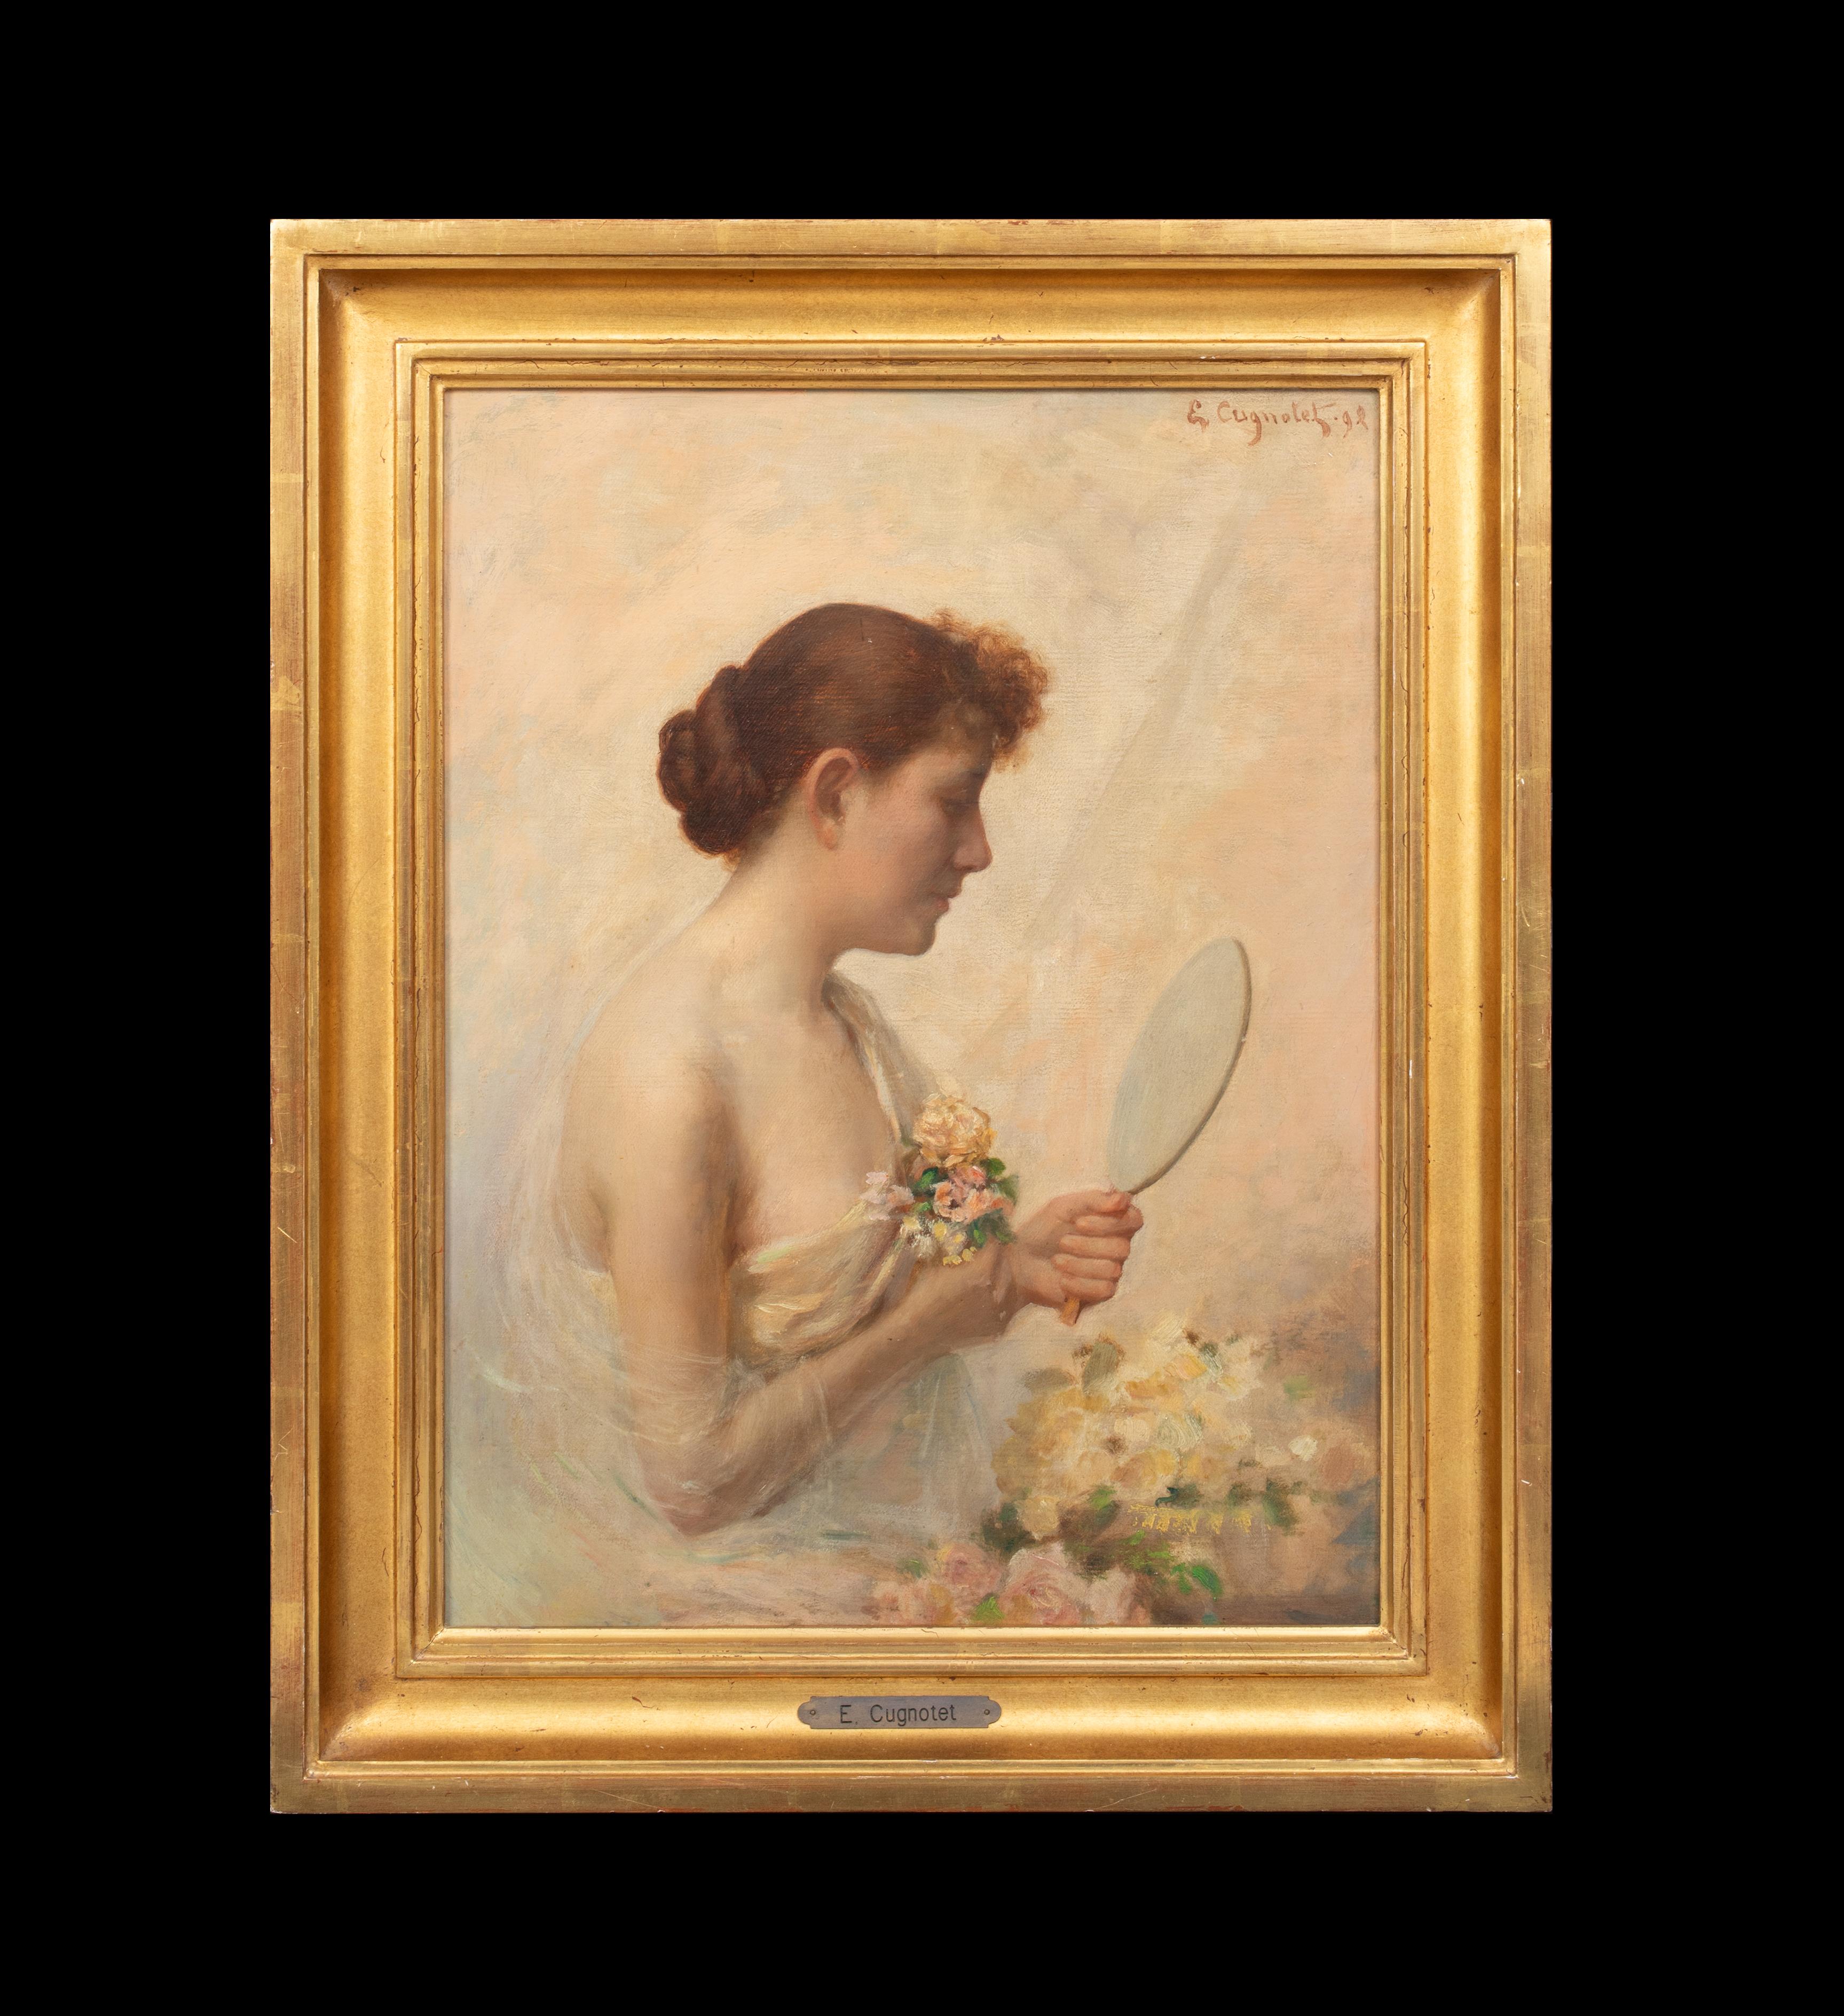 Le Miroir, dated 1892   by ÉDOUARD CUGNOTET (1848-1899) - Painting by Unknown